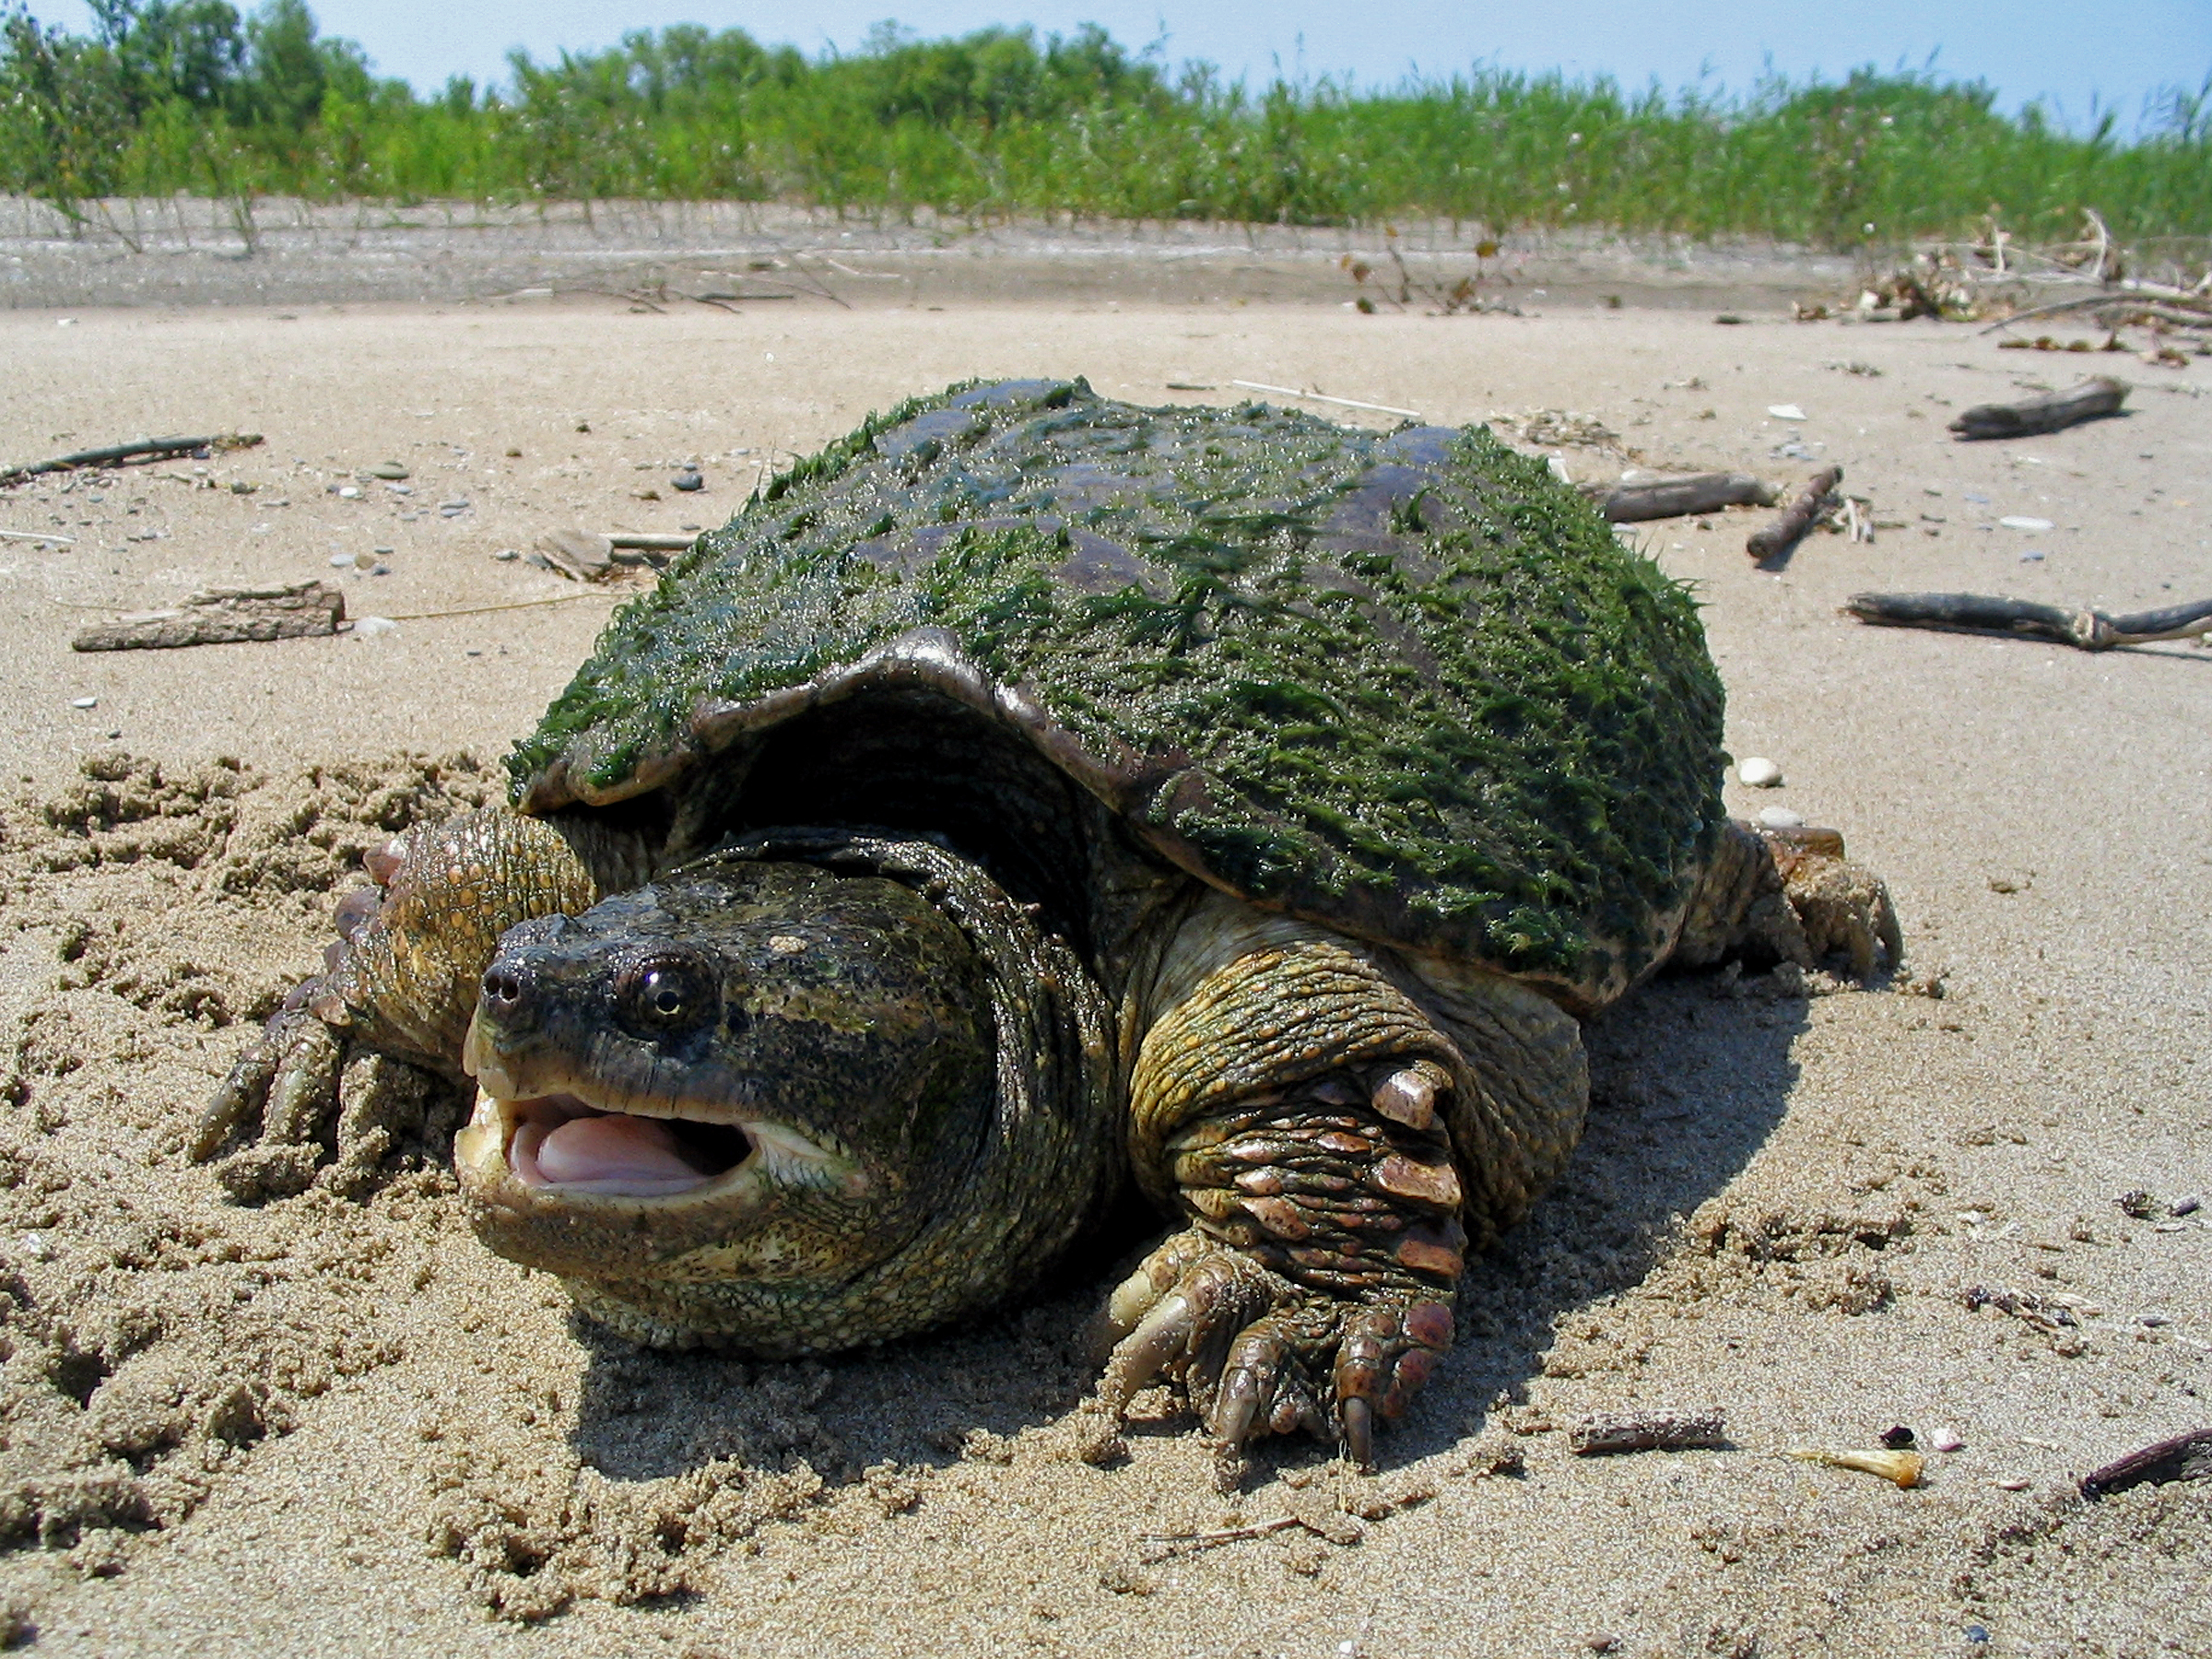 A snapping Turtle on a beach covered in algae